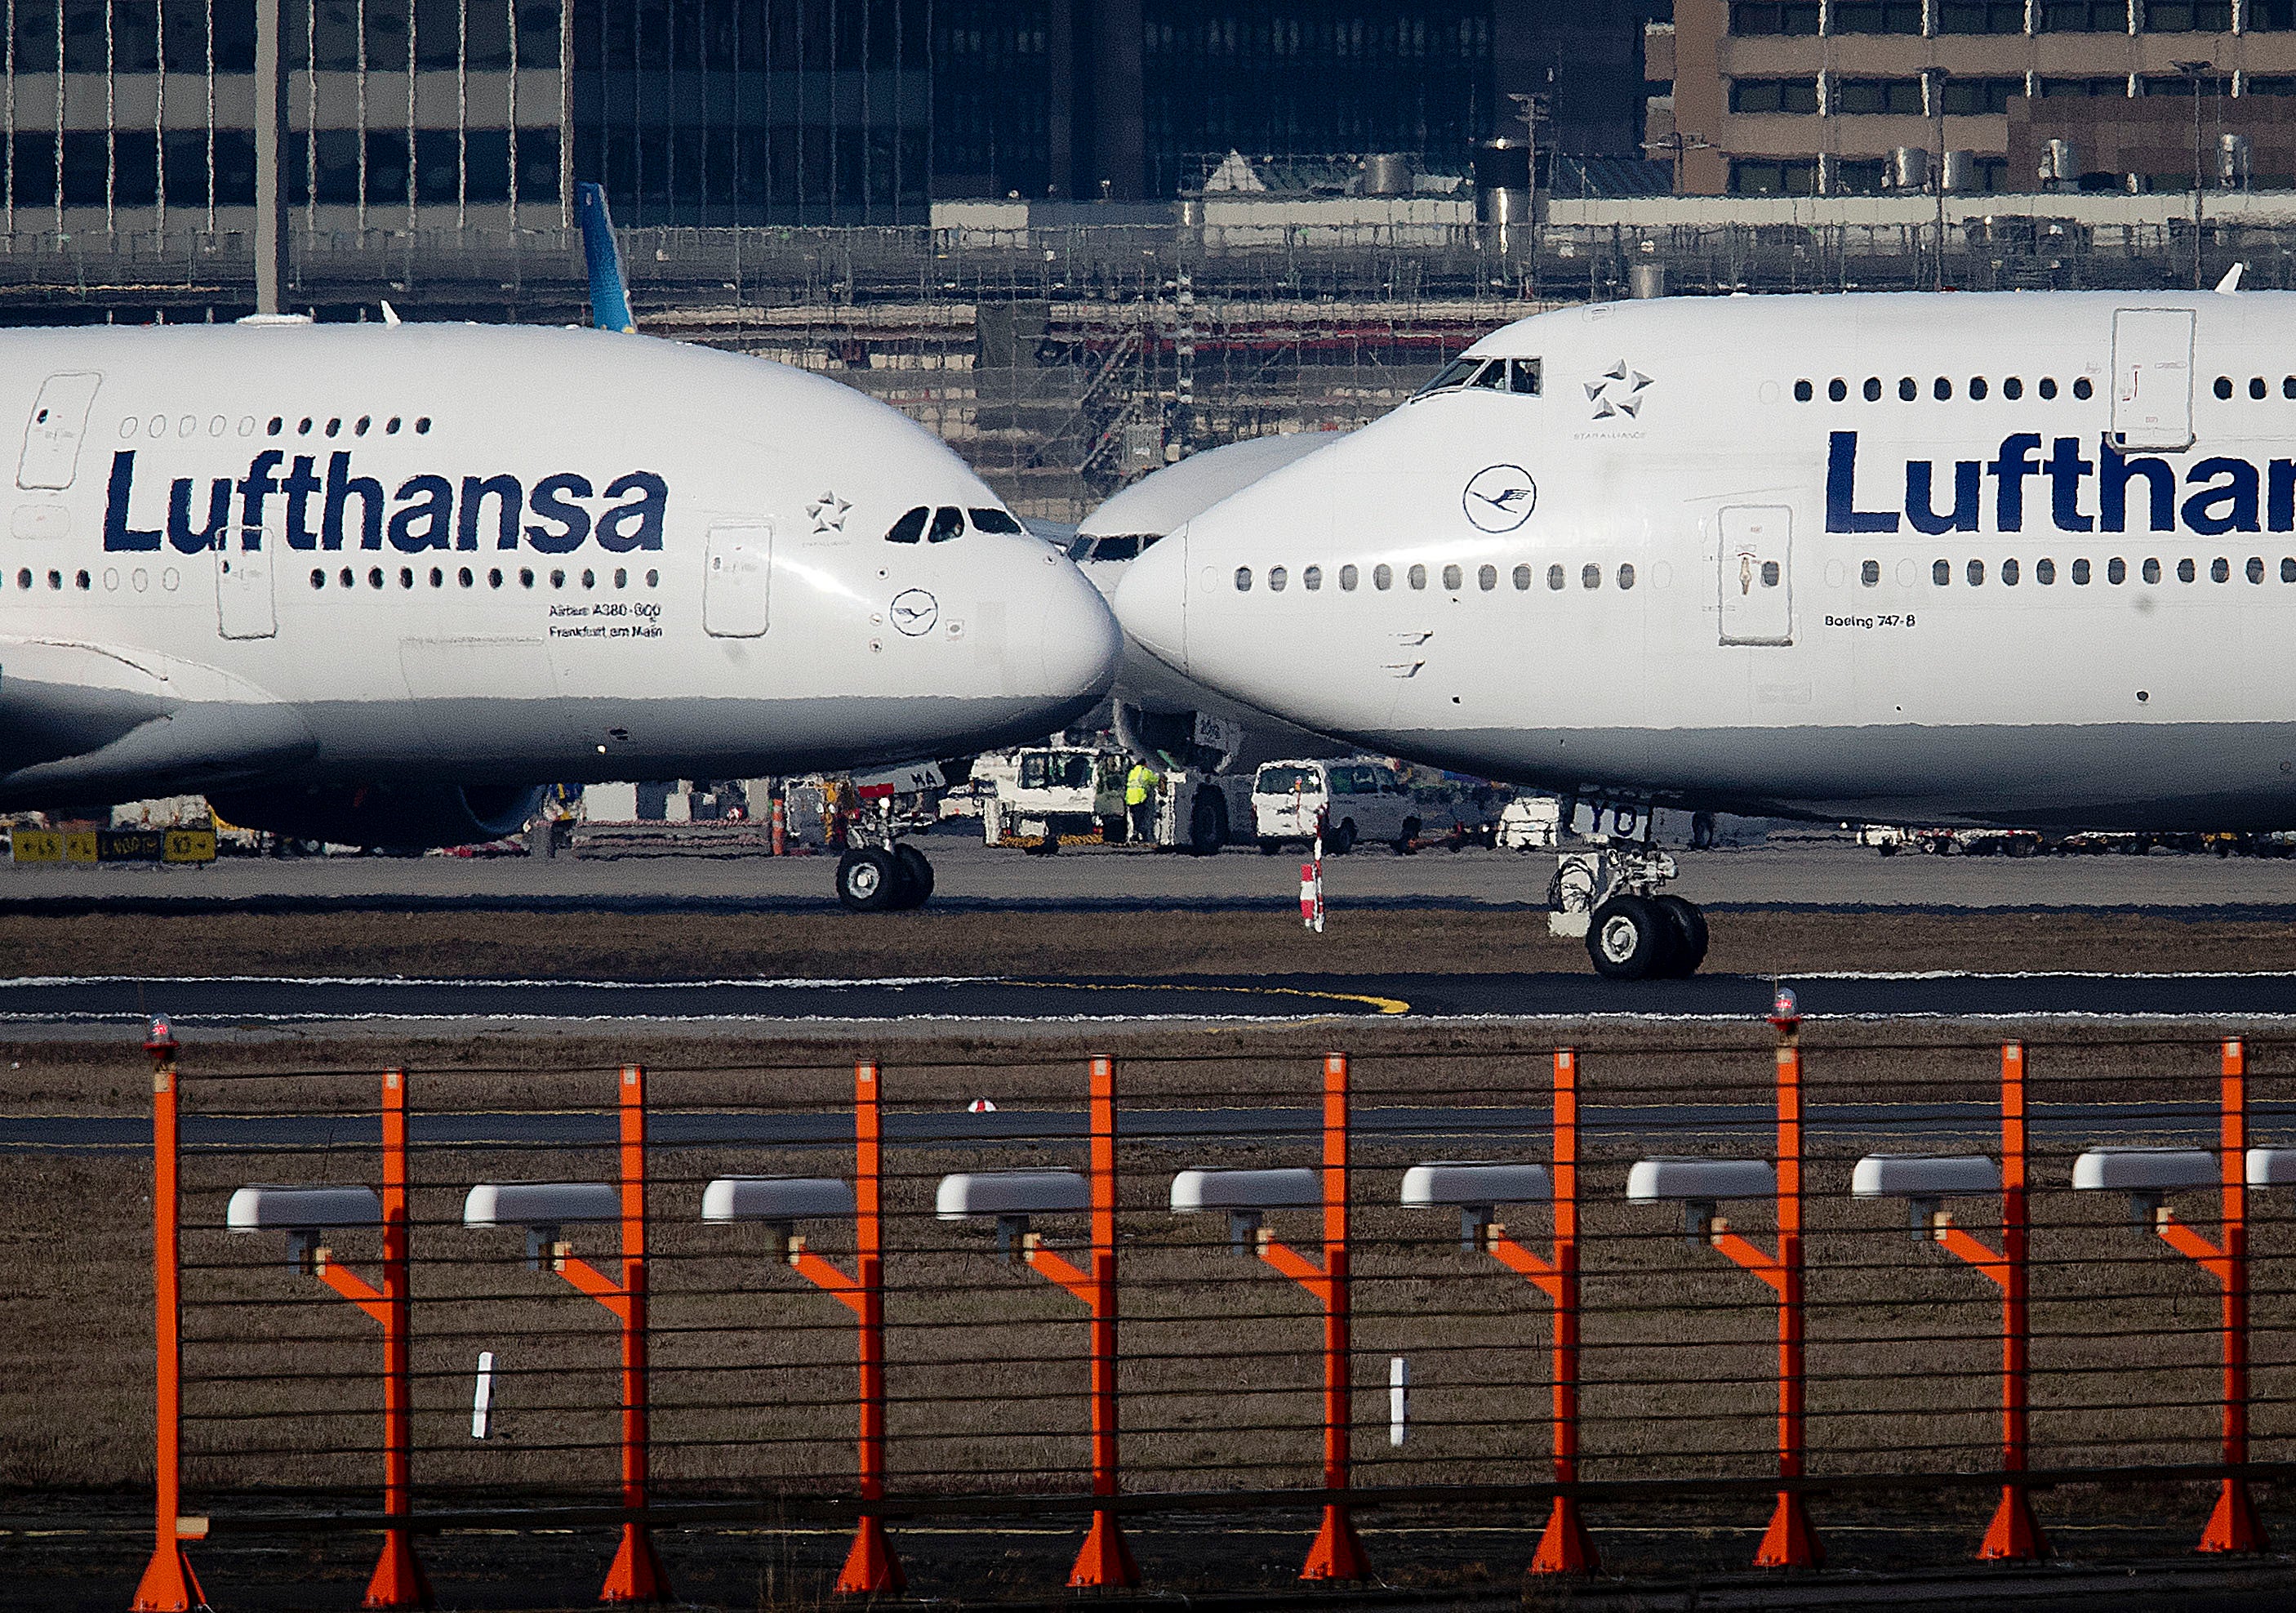 Lufthansa is launching a new initiative for economy passengers